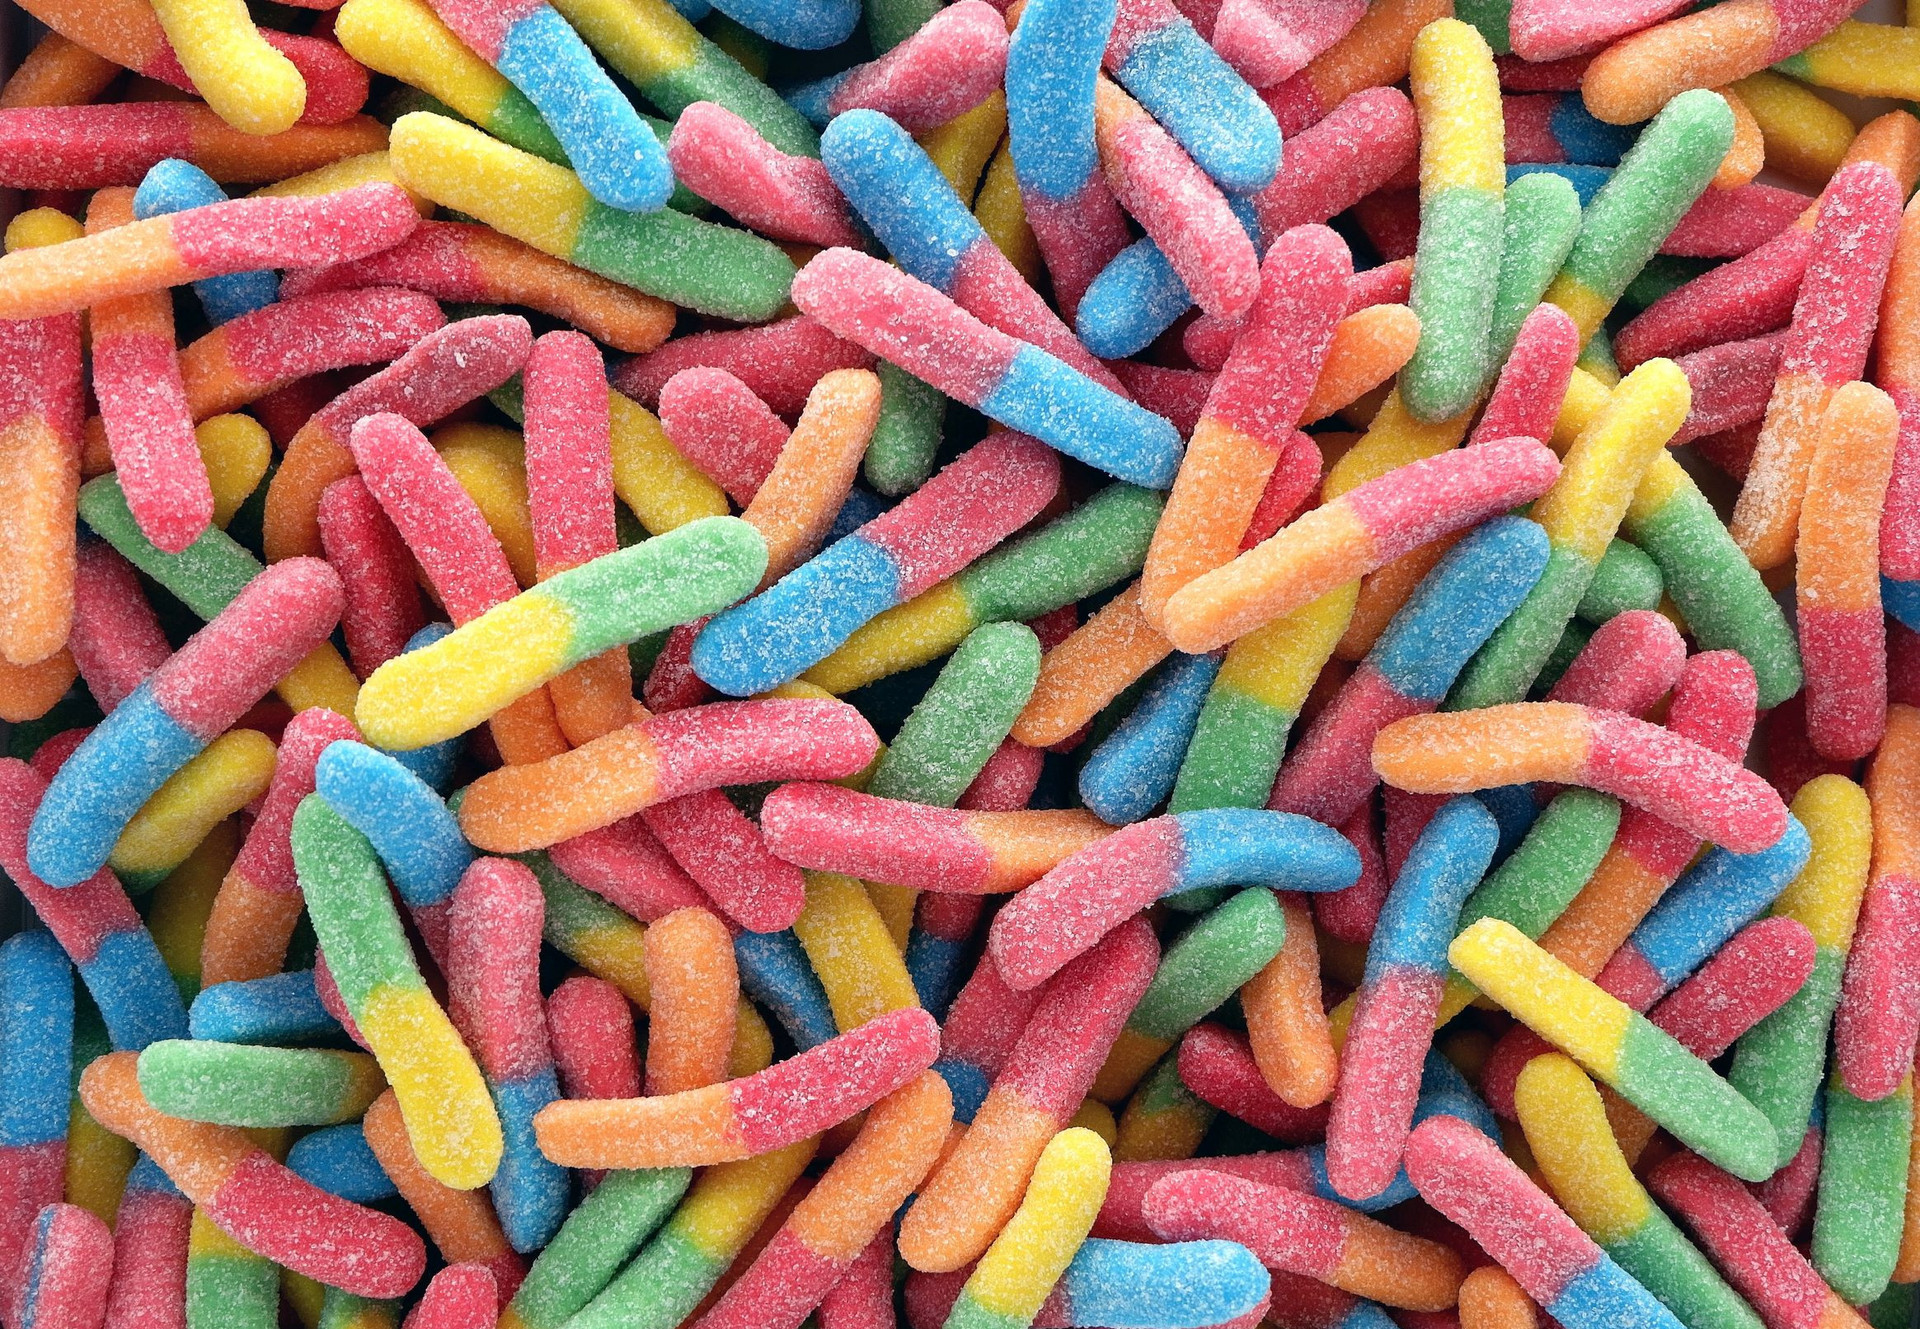 Nationwide Recall: Midwest Candy Manufacturer Pulls Products Over Salmonella Risk